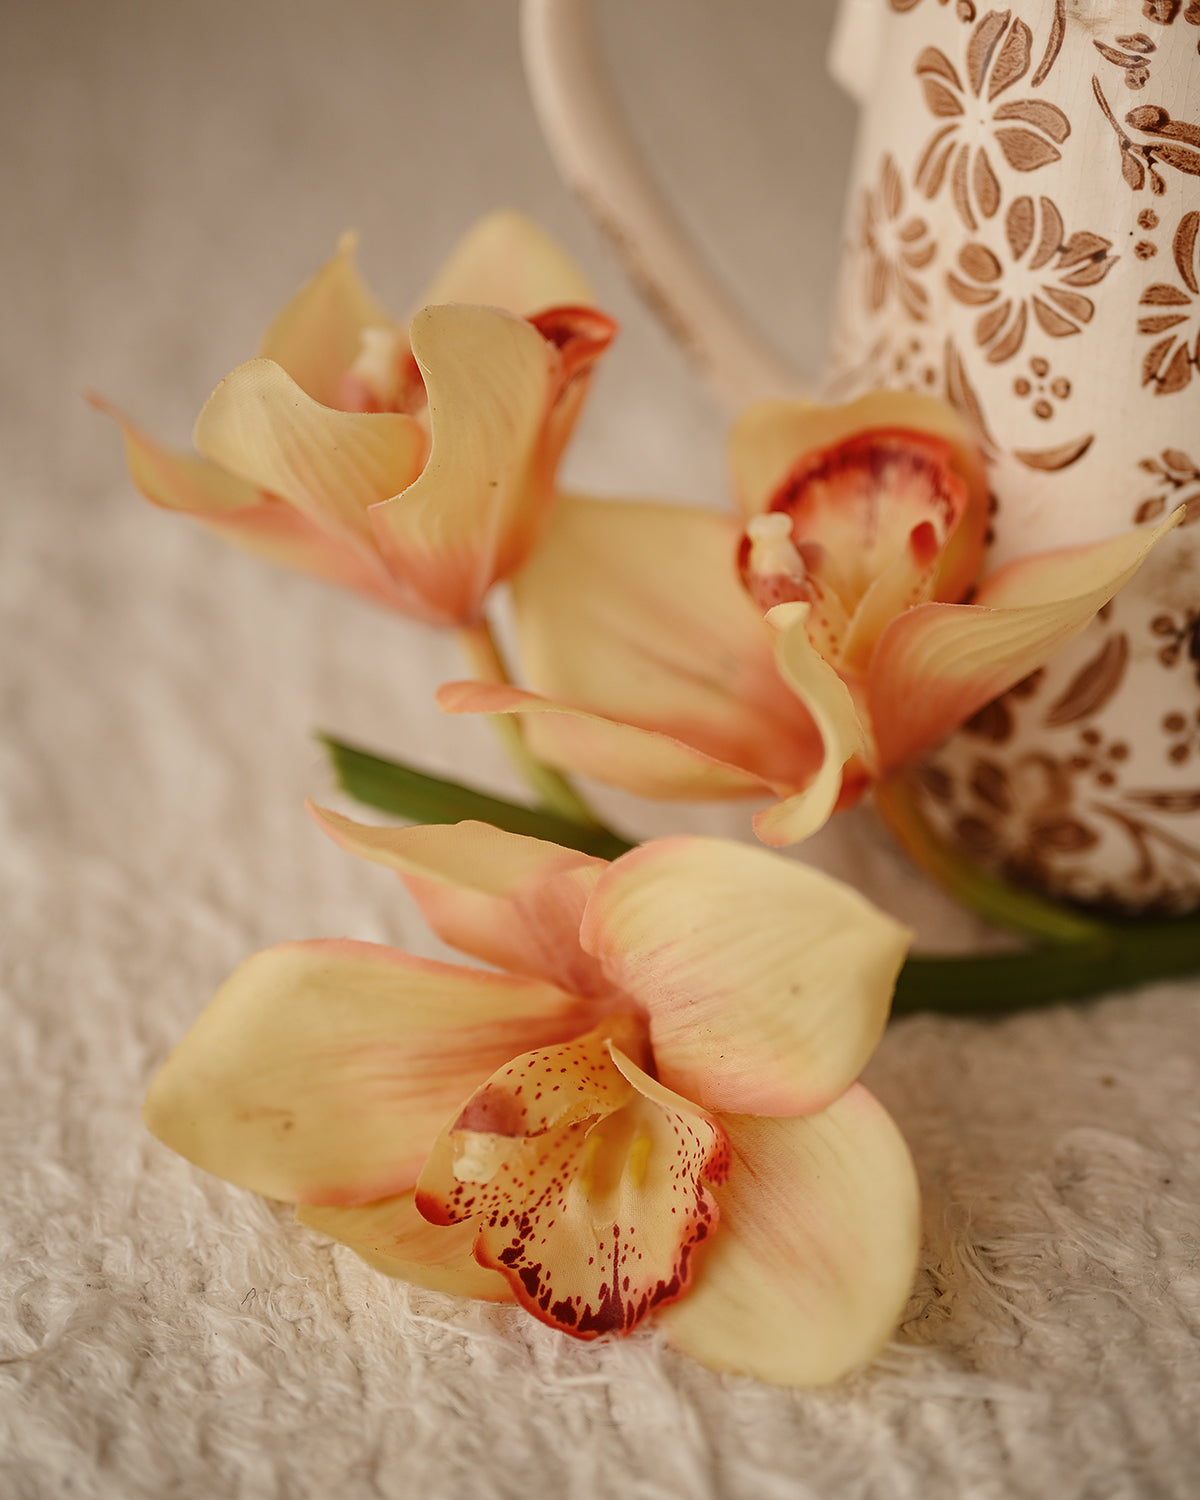 Orchid - Orange and Pink Artificial Flower